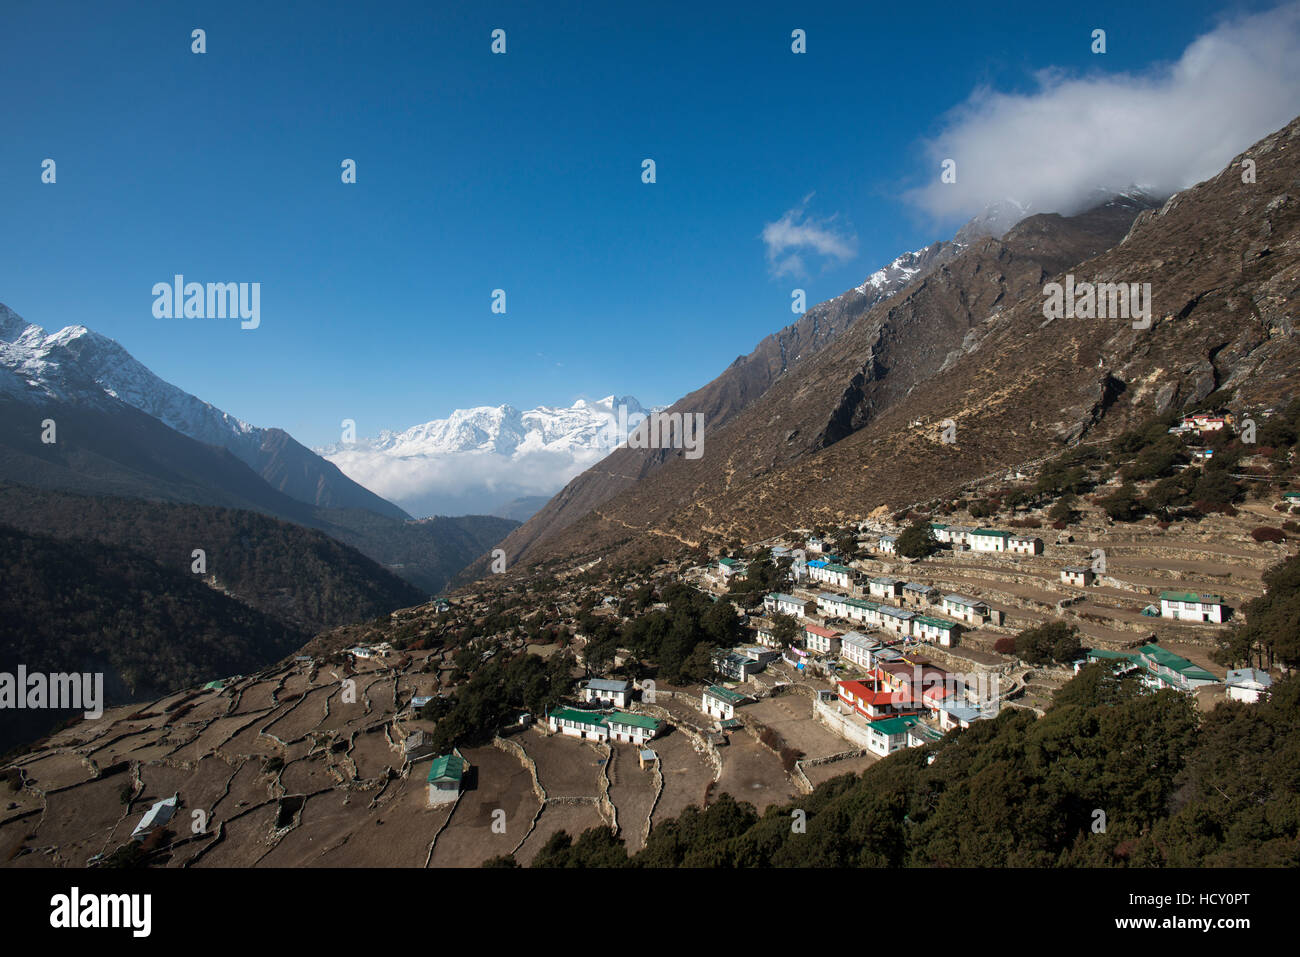 The old village of Pangboche on the Everest Base Camp trek, Nepal Stock Photo